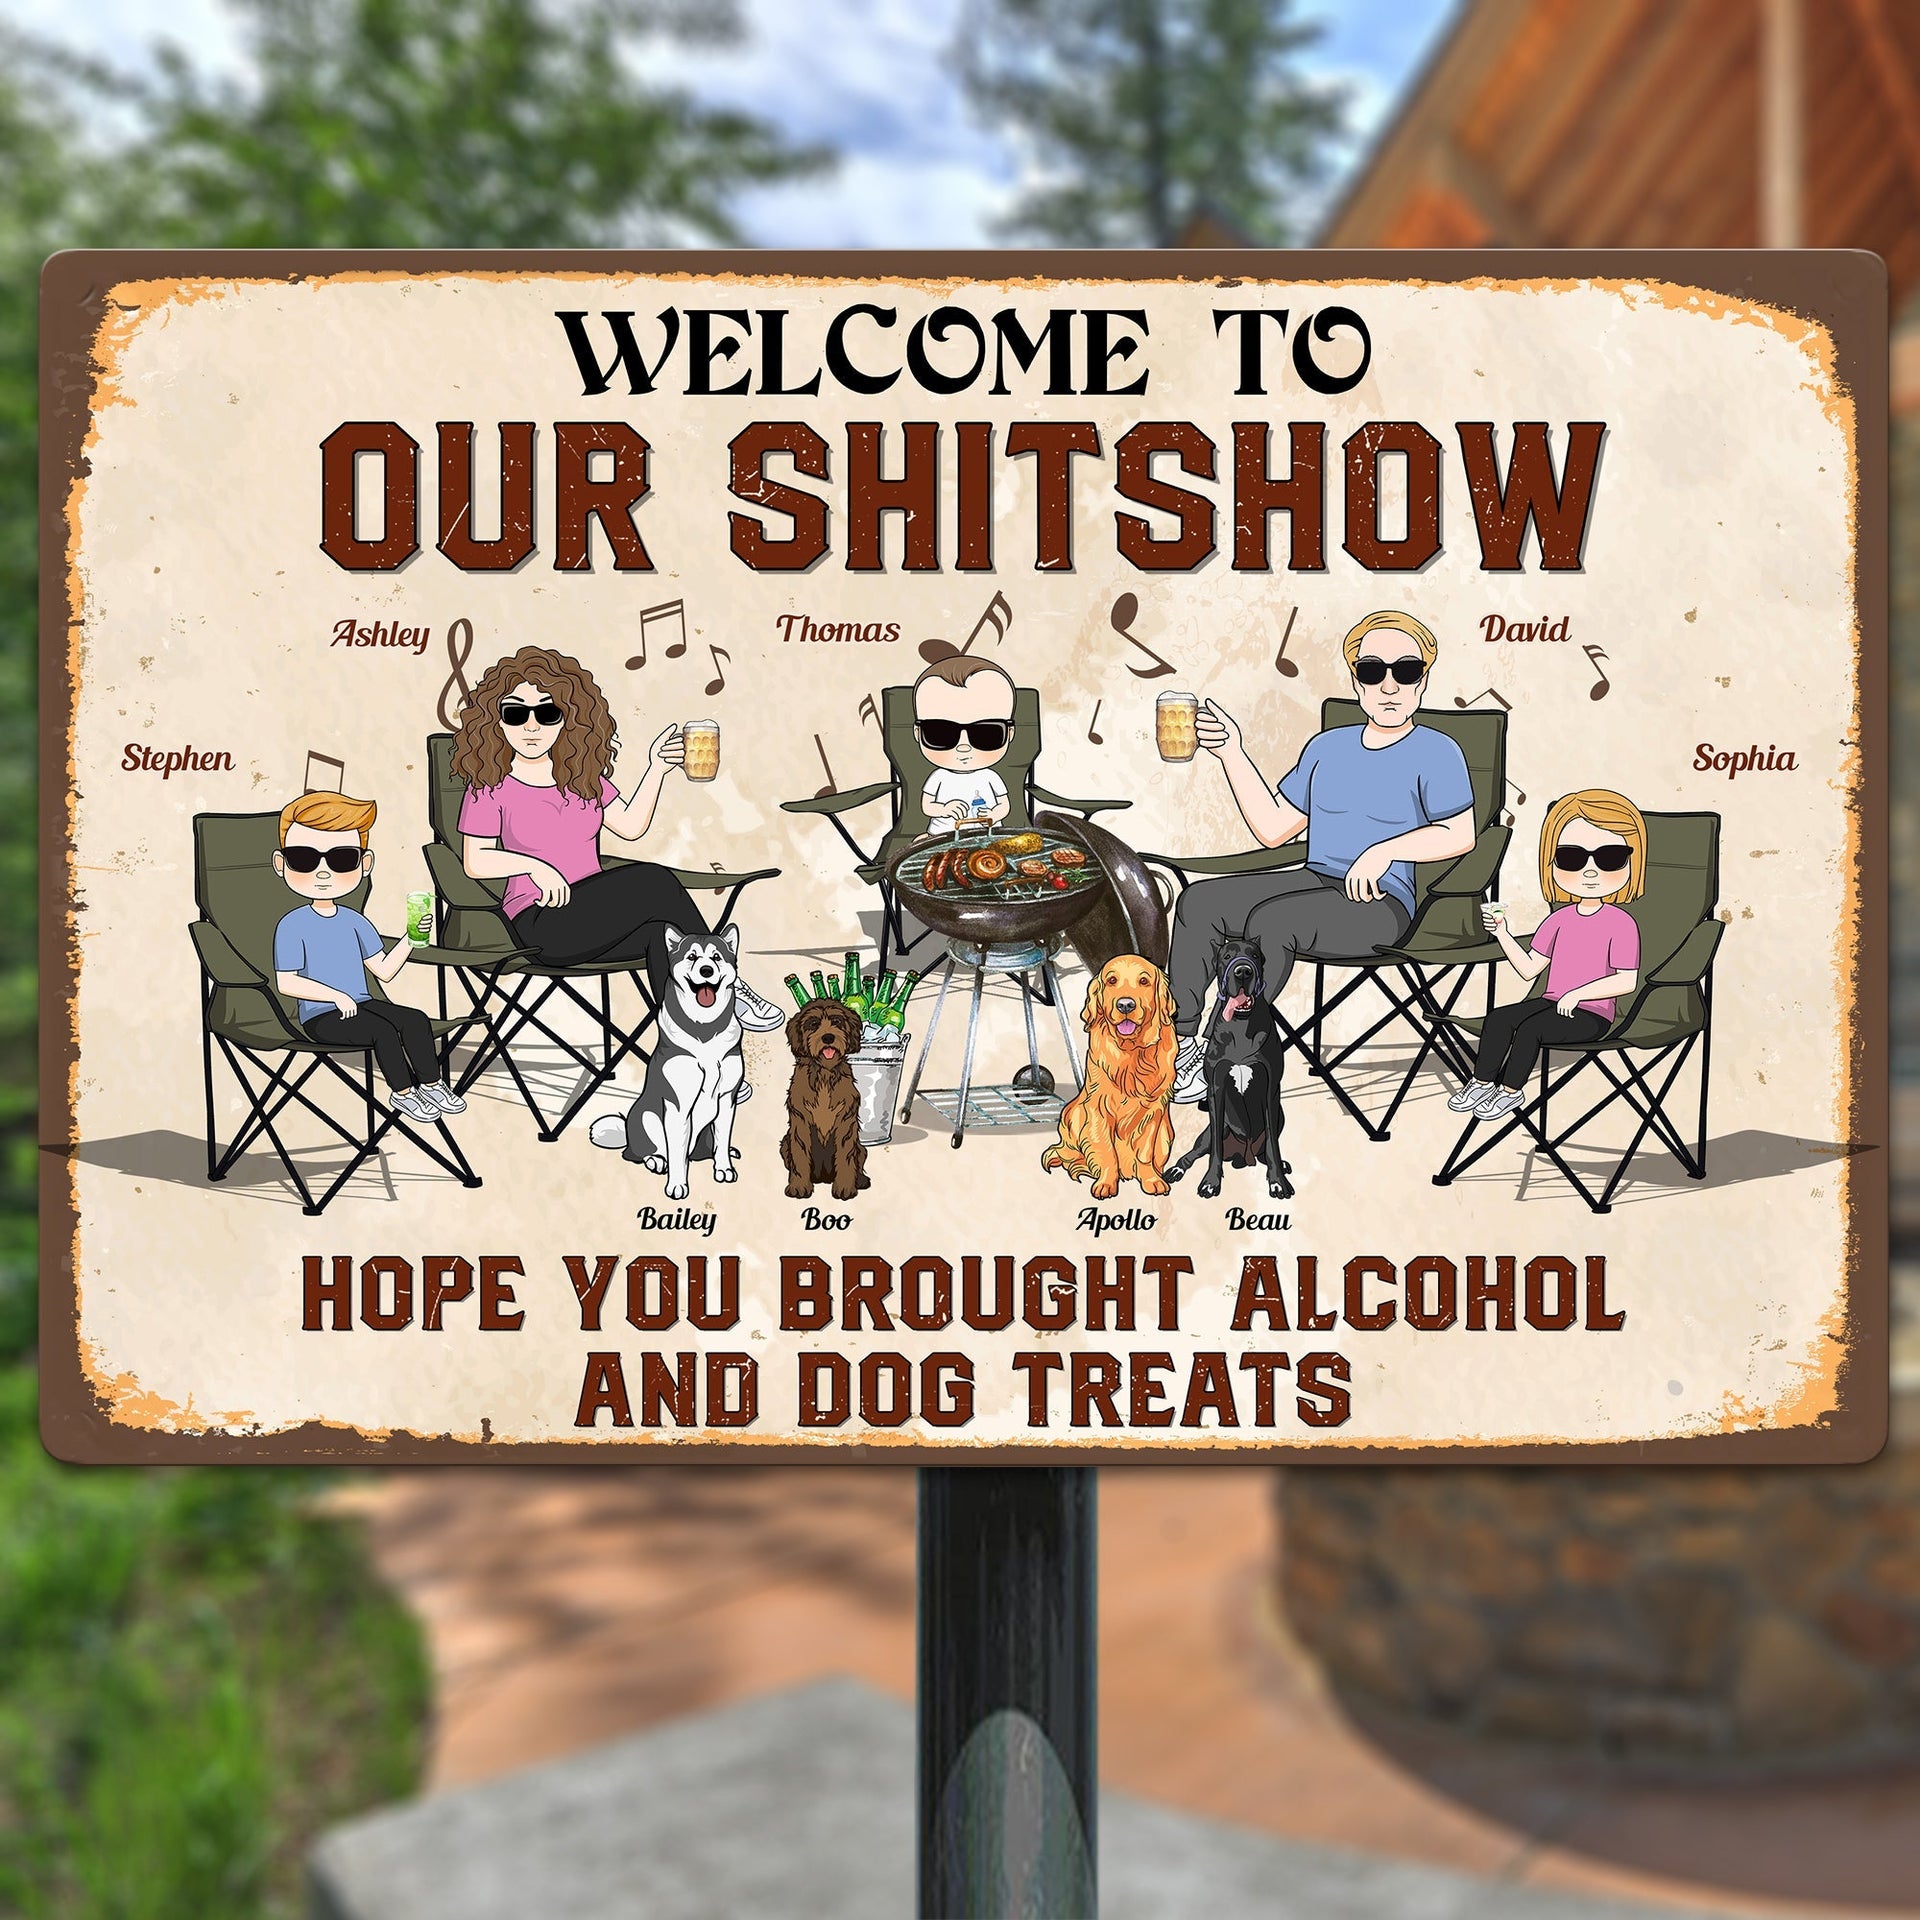 Our Shitshow Alcohol And Dog Treats - Personalized Metal Sign - Birthday Gift For Family, Dog Lover, Husband, Wife